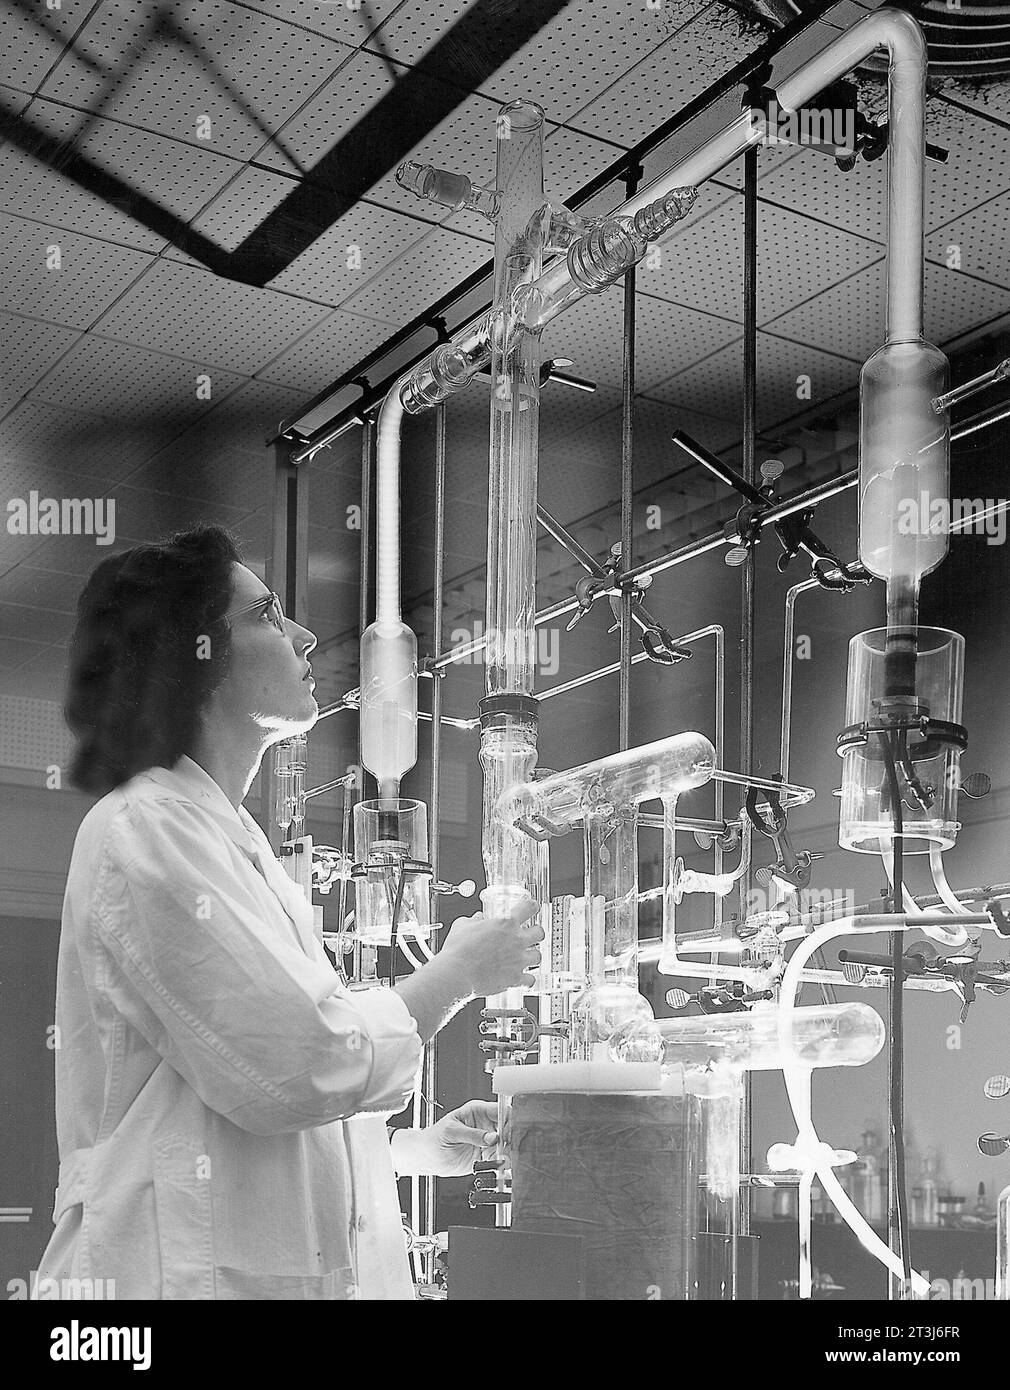 Myrna Steele, physicist at NASA Lewis Research Center, working on an atomic laboratory experiment that pushed a gas at low pressure through a high-voltage discharge, 1957 Stock Photo